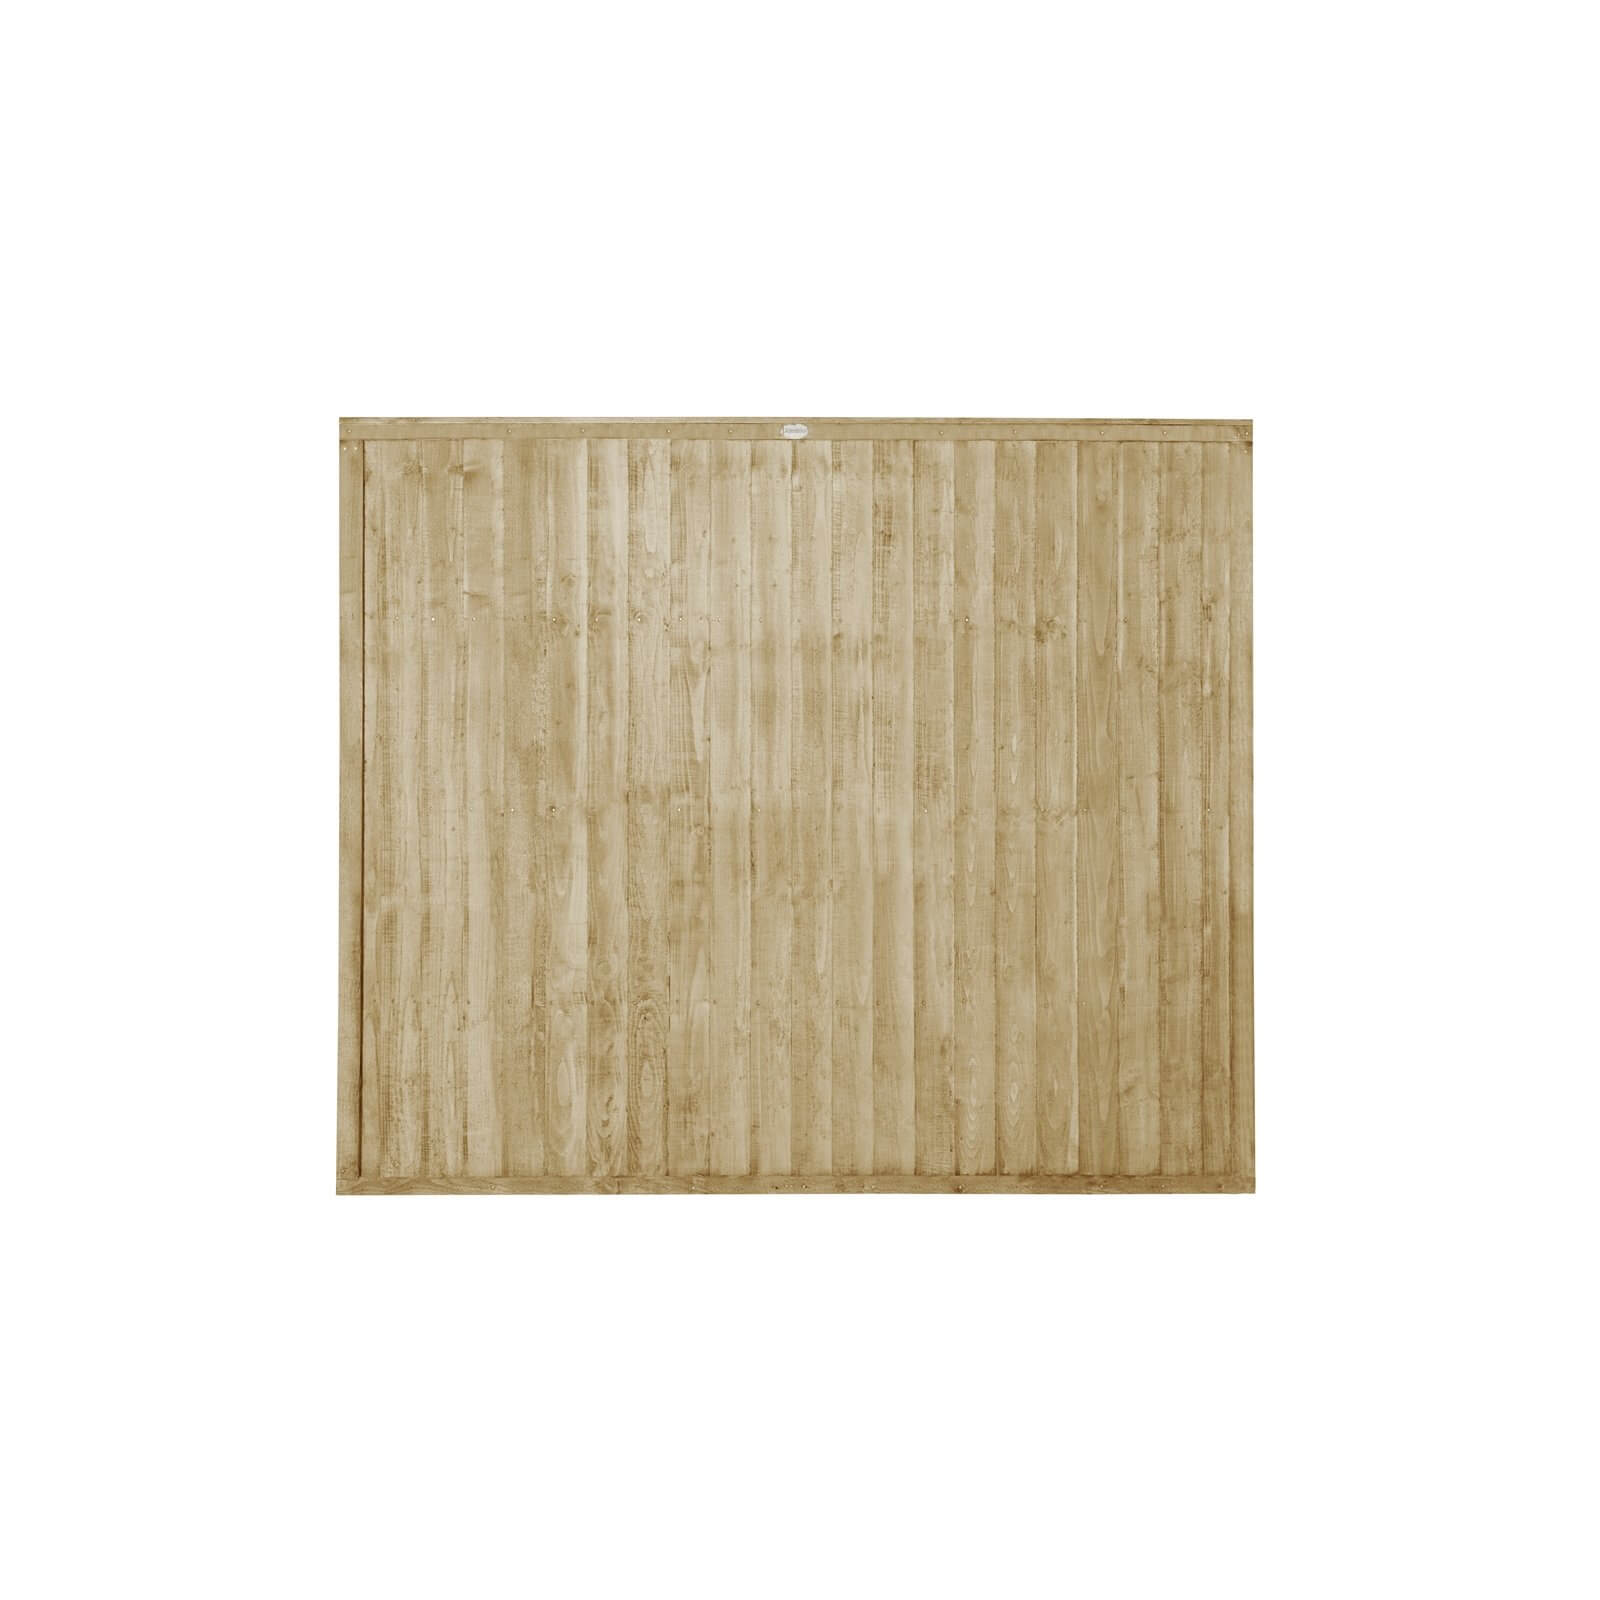 6ft x 5ft (1.83m x 1.52m) Pressure Treated Closeboard Fence Panel - Pack of 5